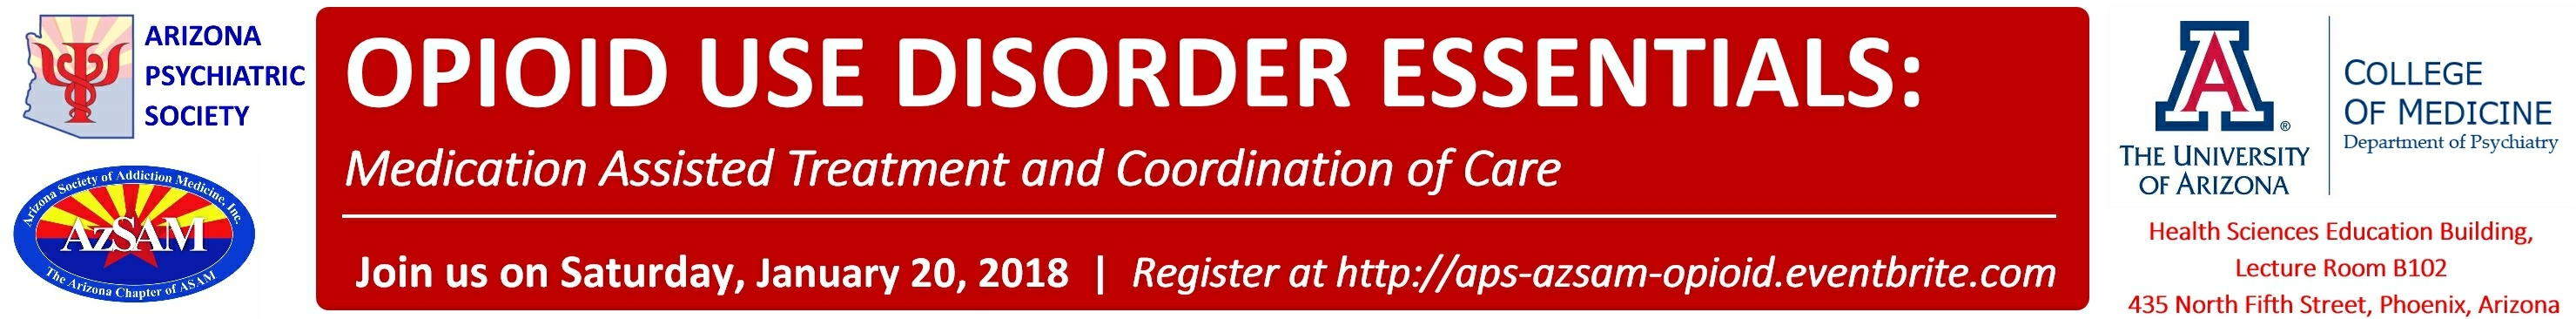 Opioid Use Disorder Essentials Information Banner with Logos